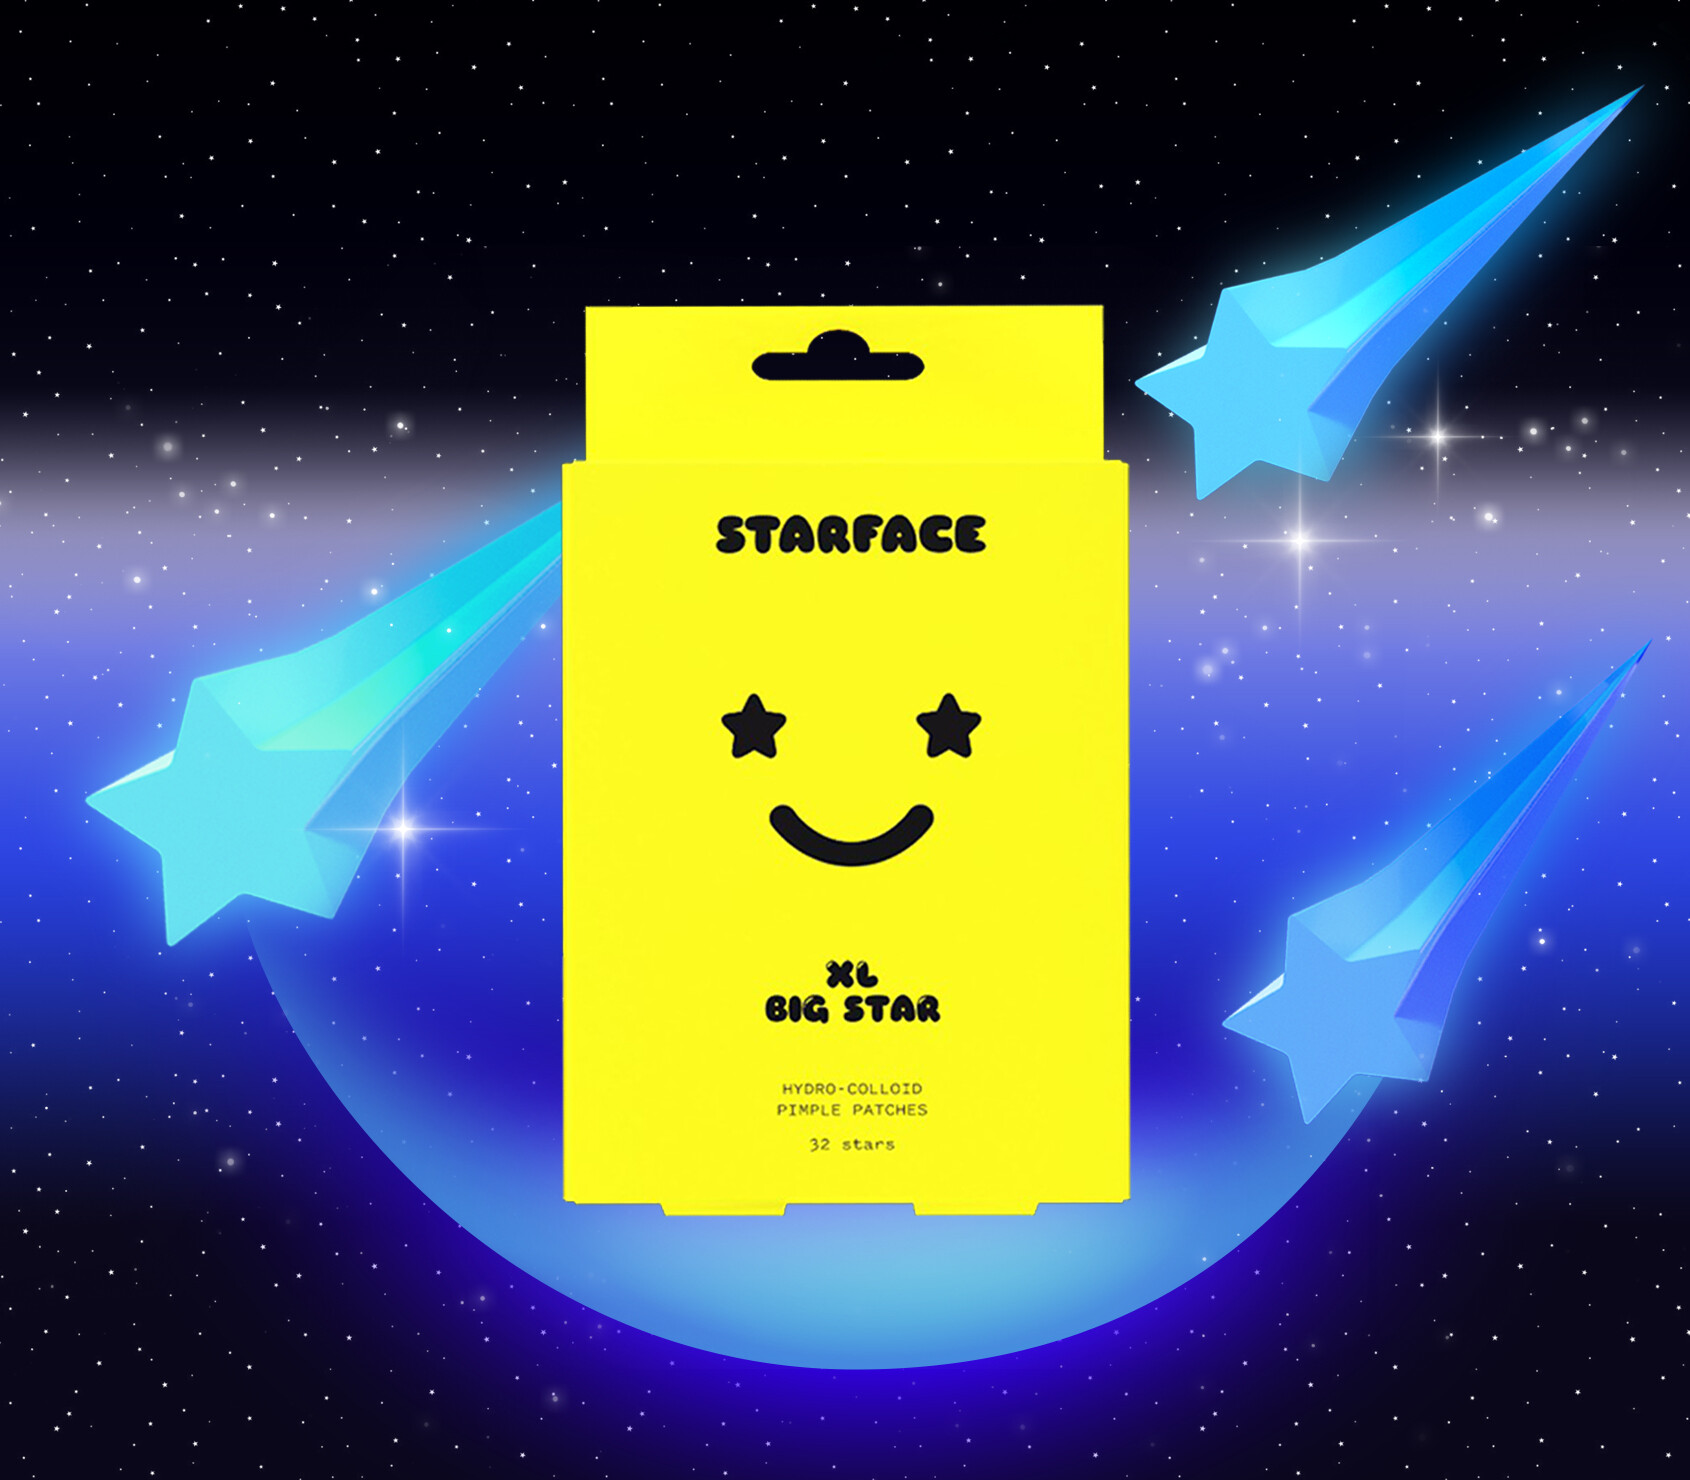 Starface XL BIG STAR Pimple patches